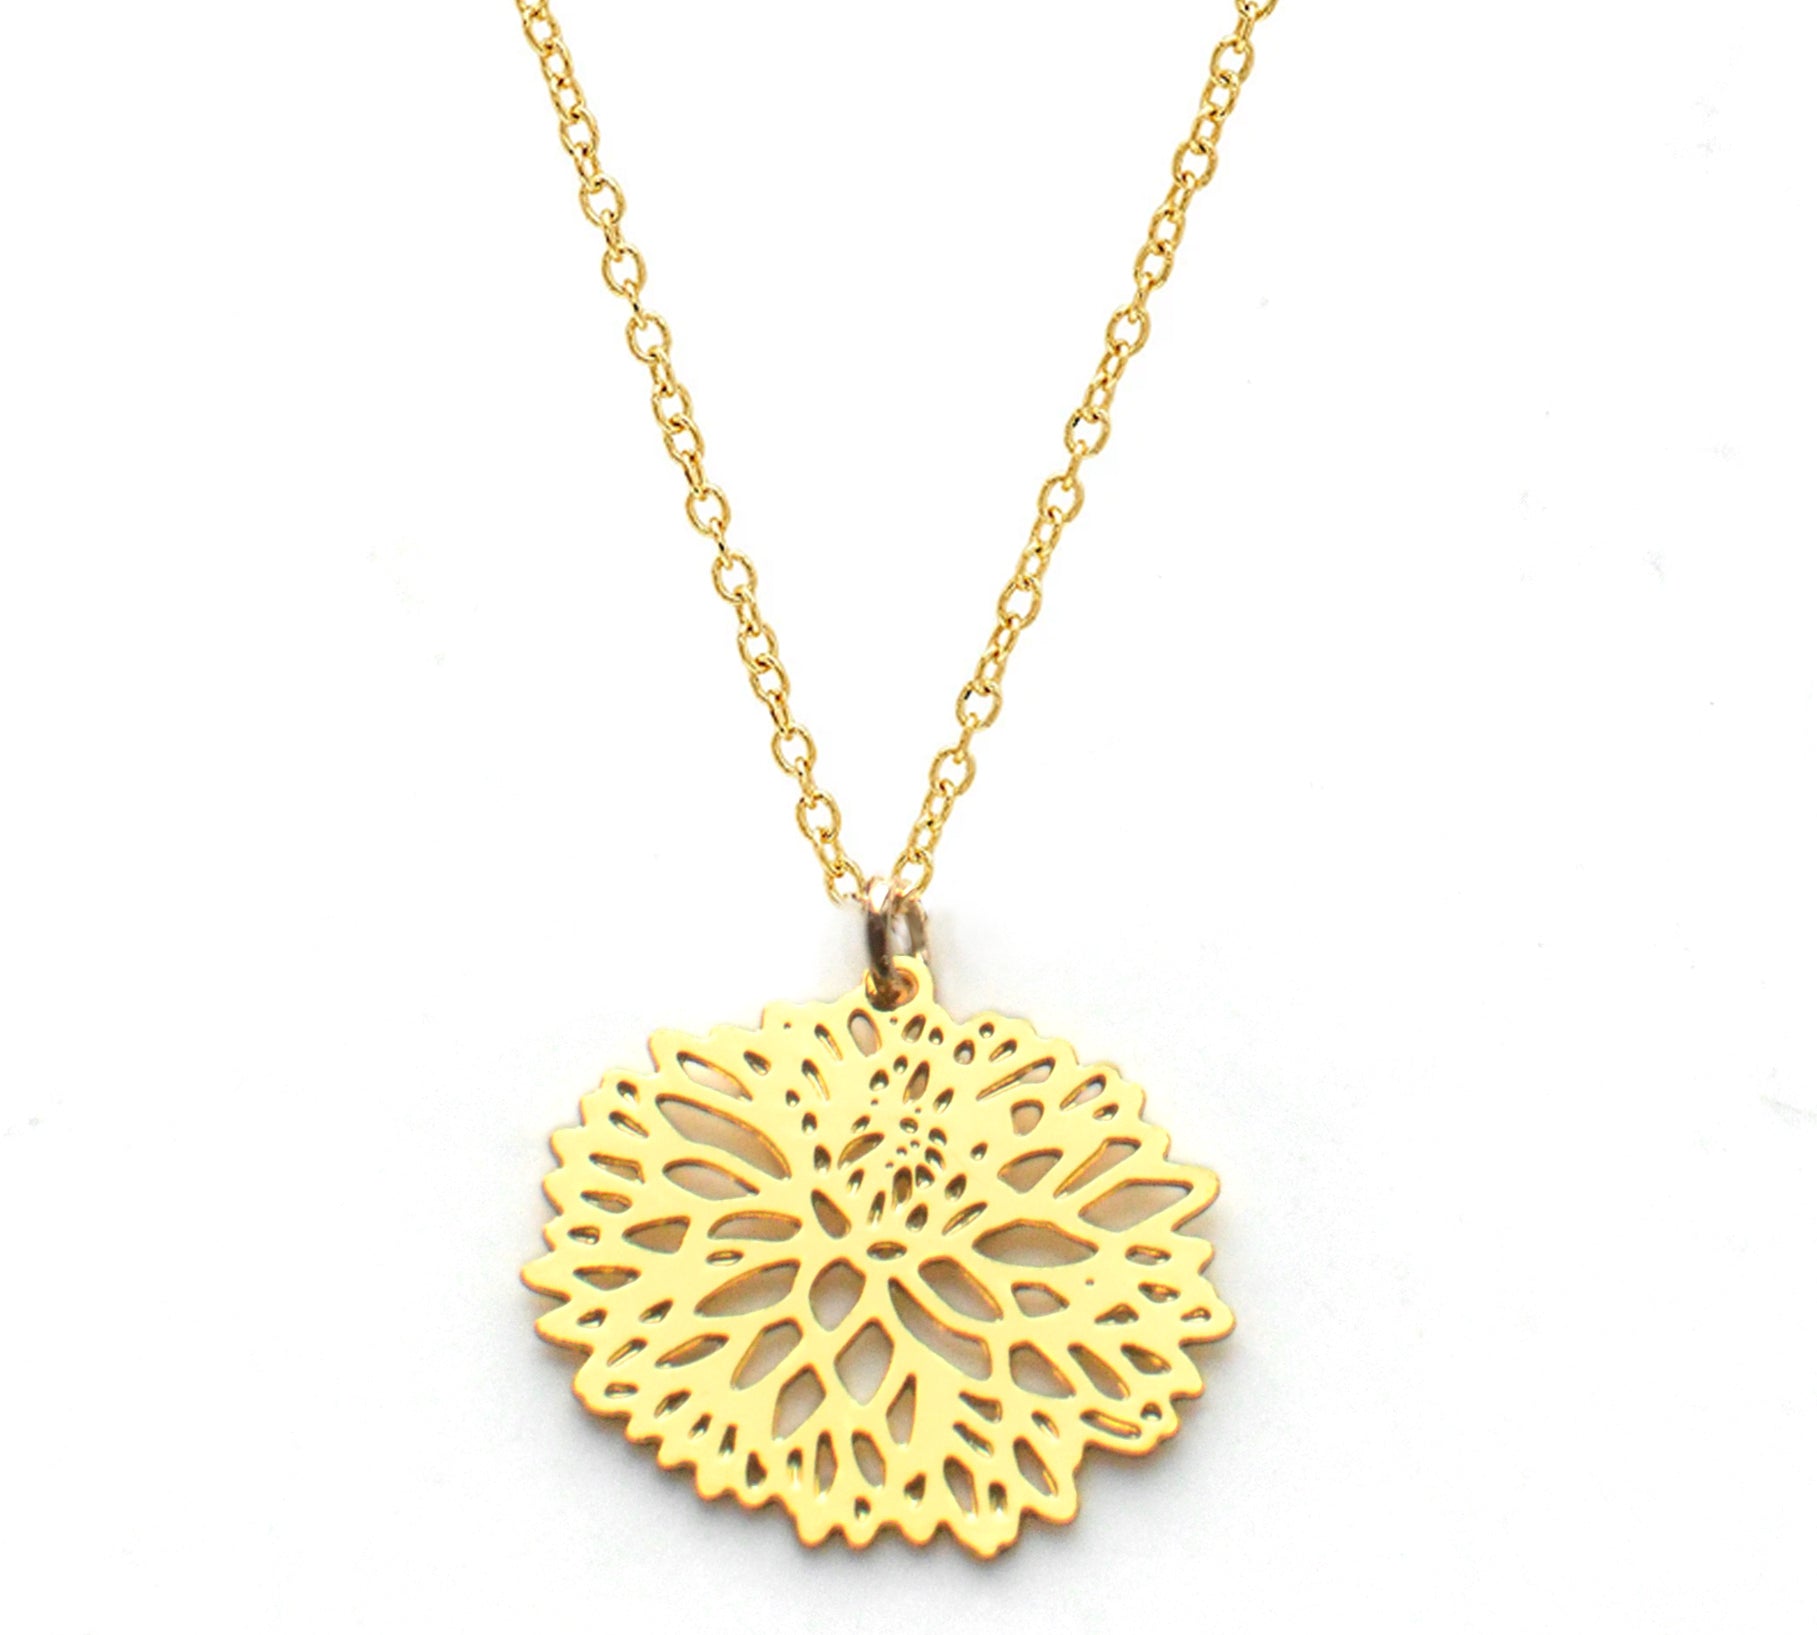 Chrysanthemum Necklace - High Quality, Affordable, Whimsical, Hand Drawn Necklace - November Birthday Gift - Available in Gold and Silver - Made in USA - Brevity Jewelry